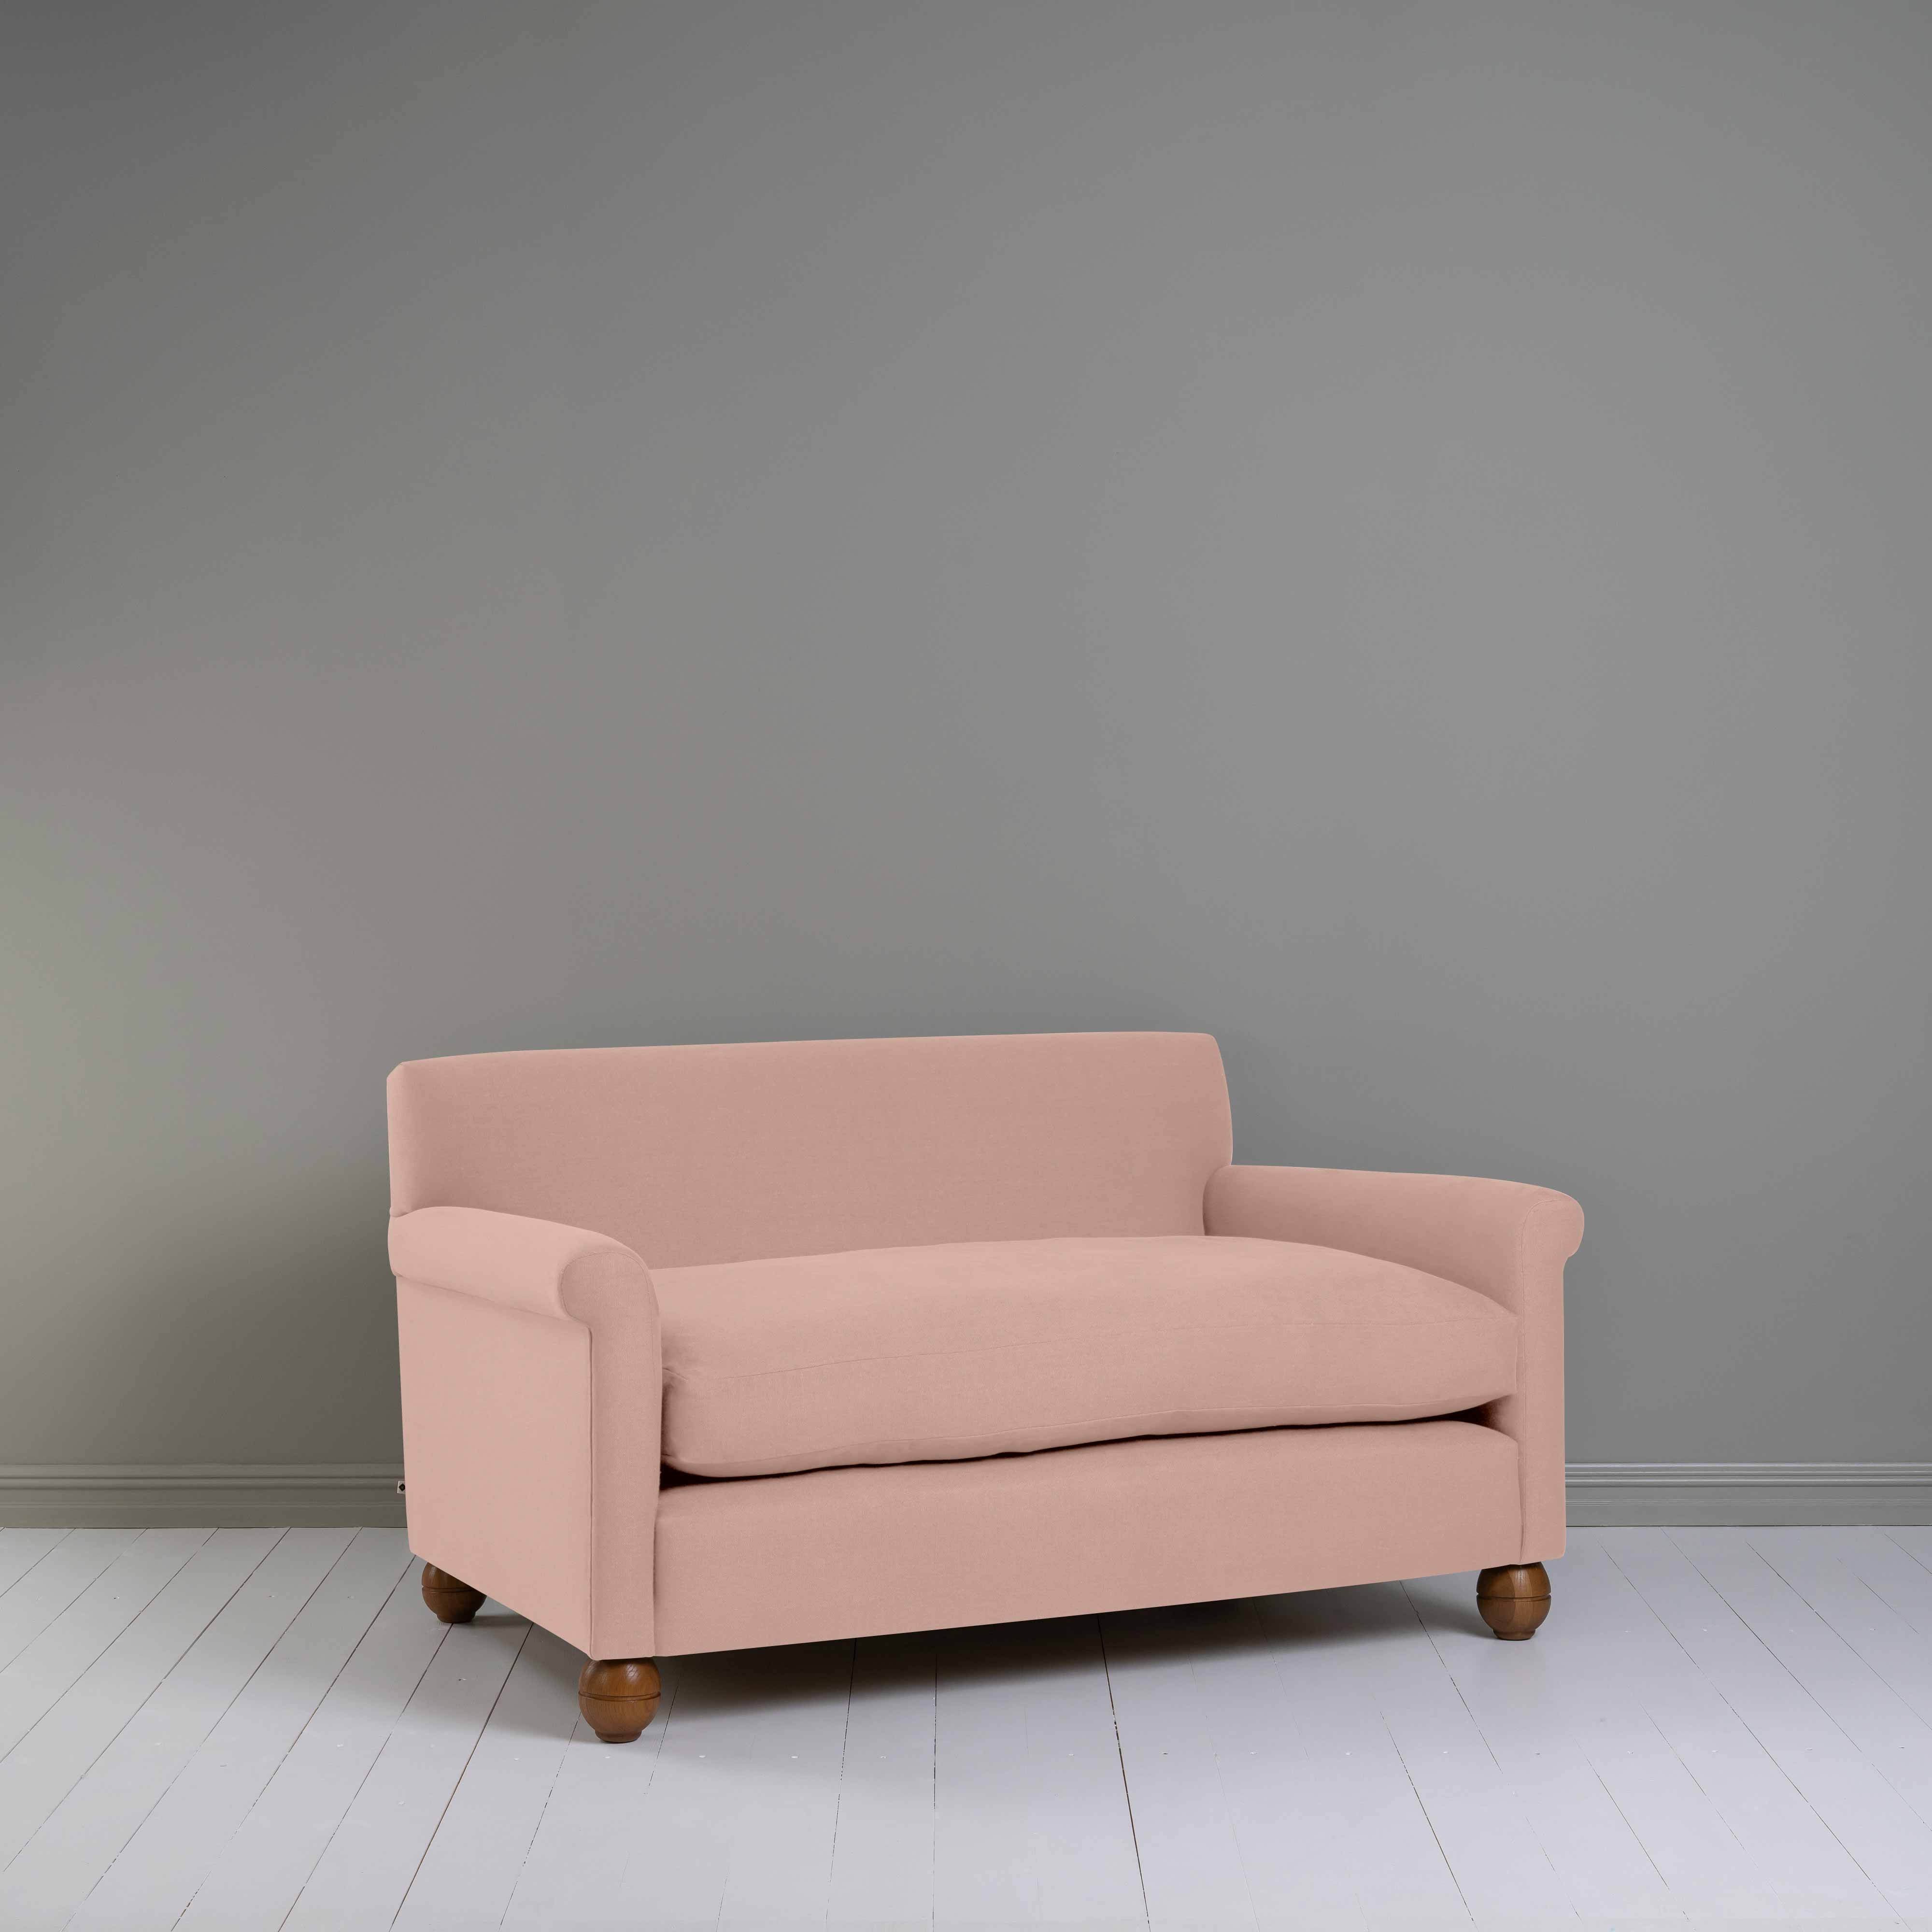  Idler 2 Seater Sofa in Laidback Linen Dusky Pink 